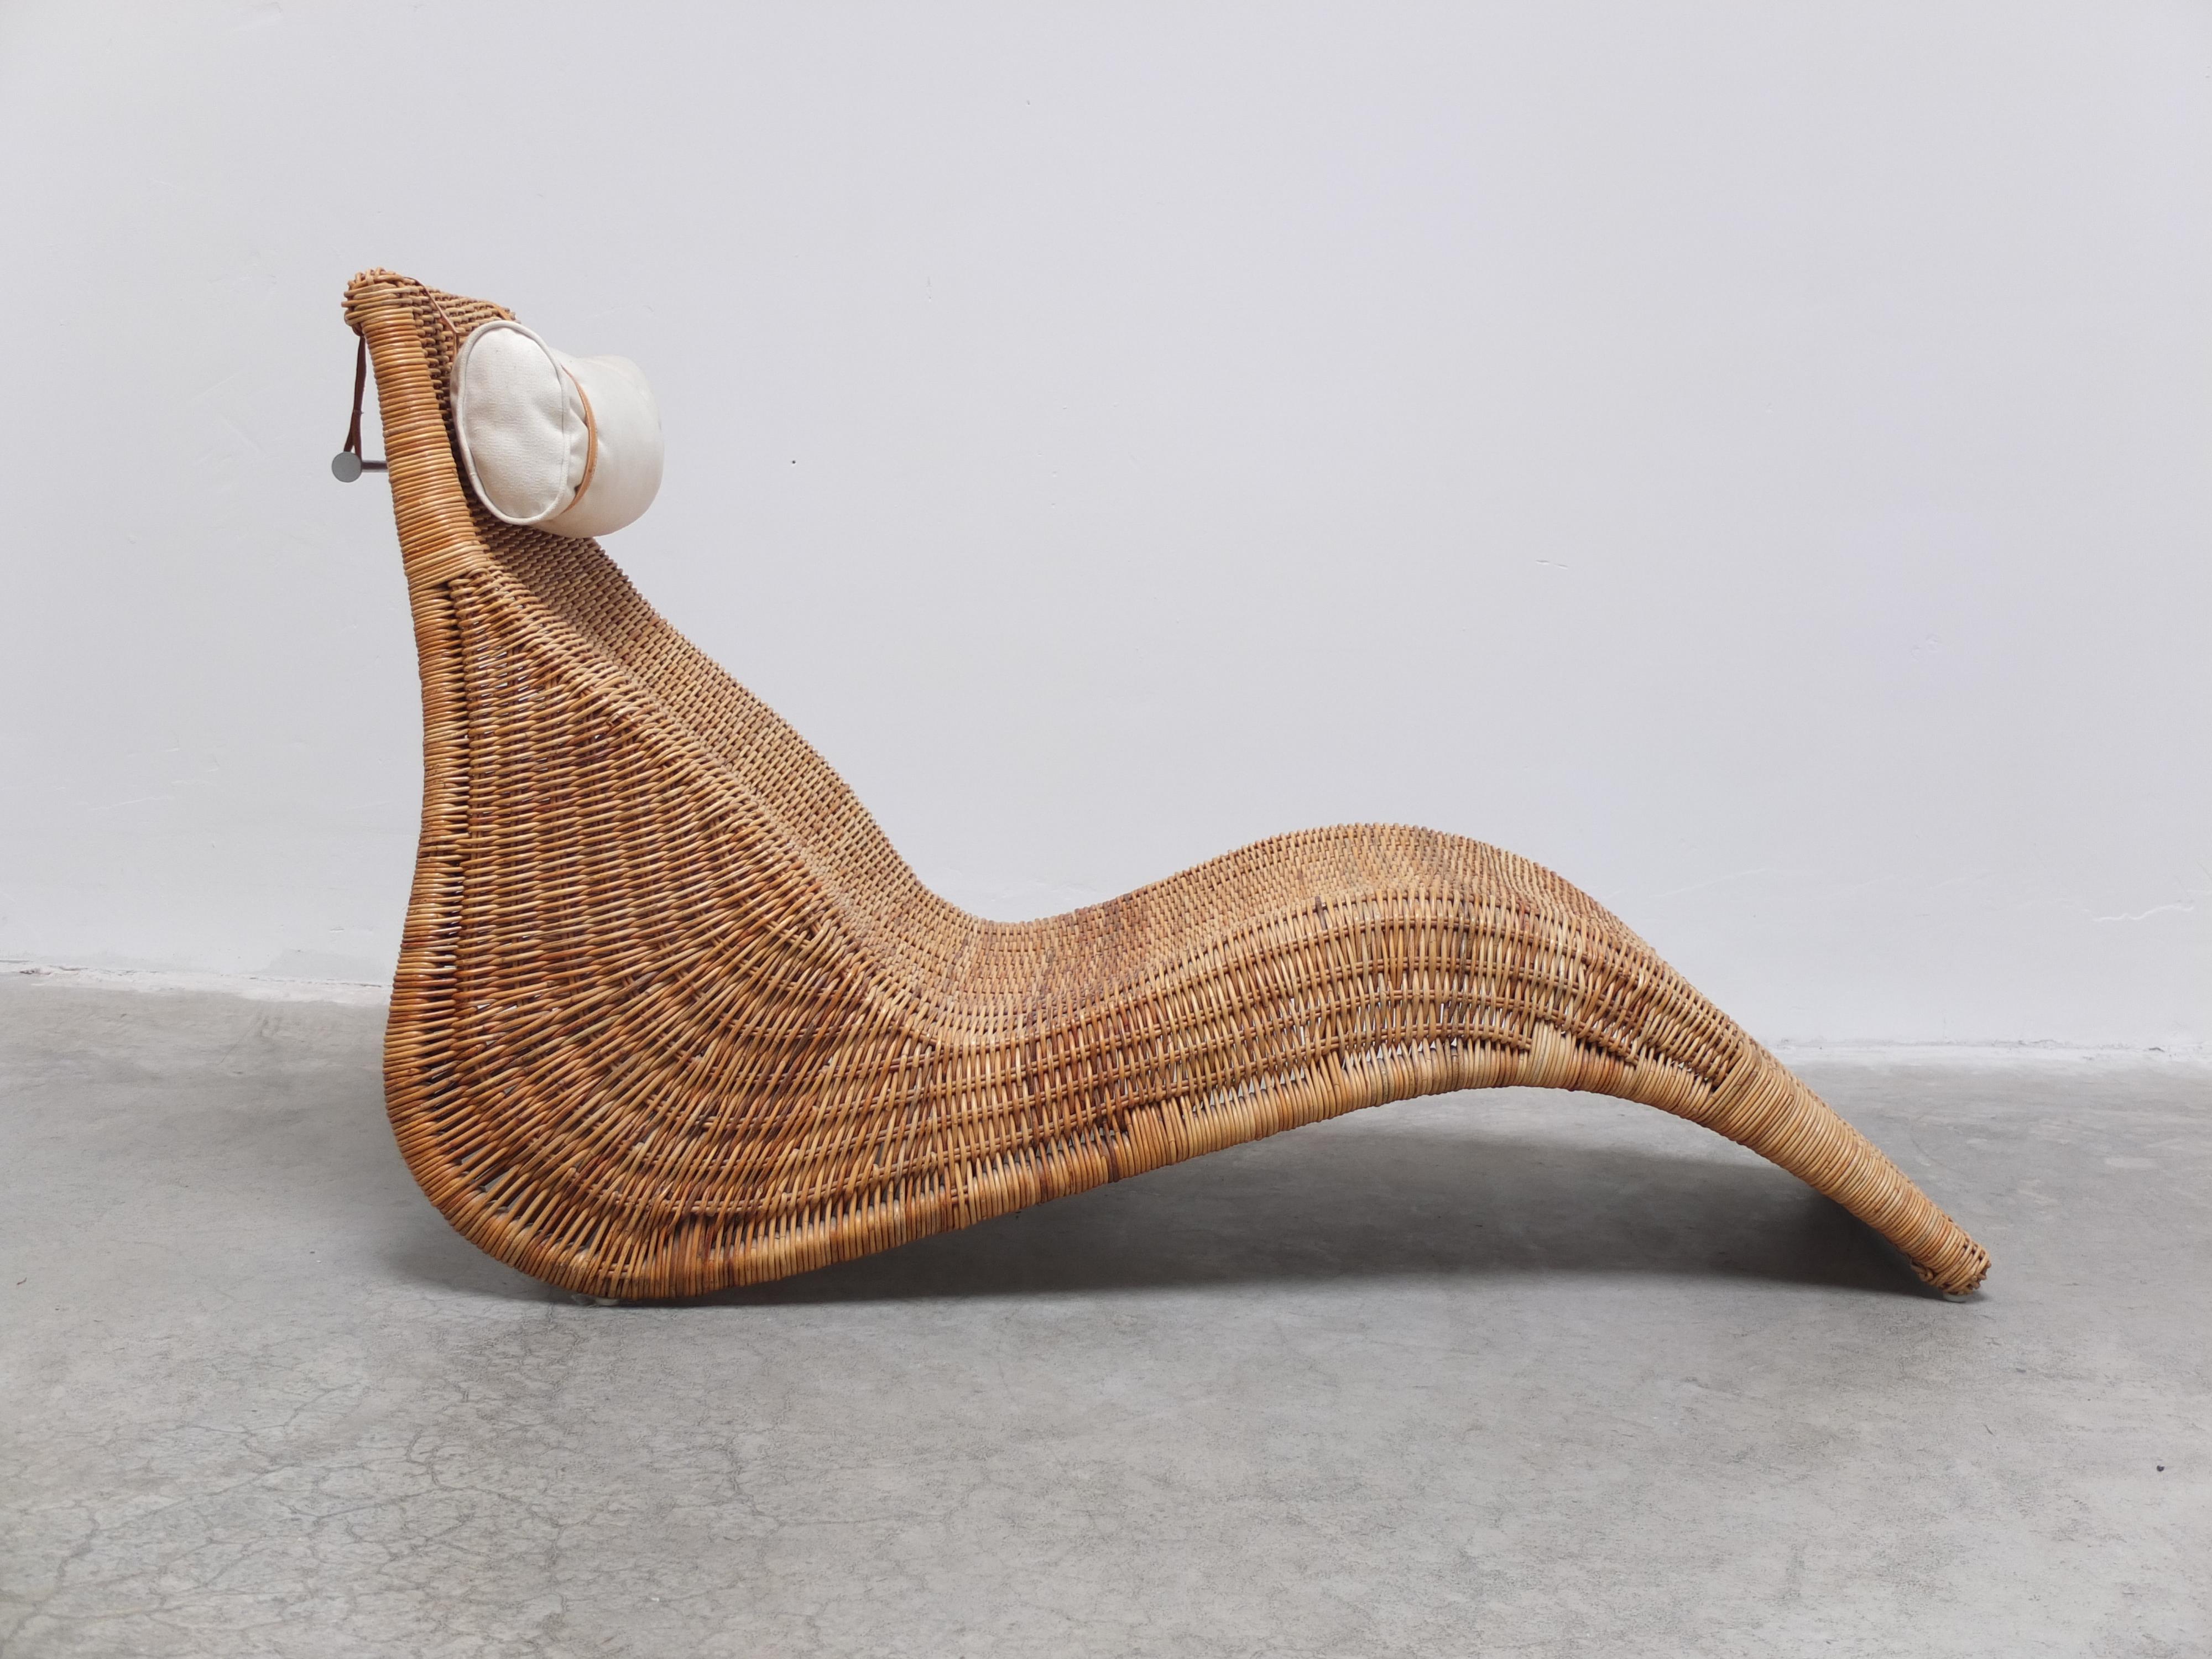 Limited edition ‘Karlskrona’ lounge chair or chaise longue designed by Karlm Malmvell for Ikea in 1998. Made of rattan (wicker) and comes with the original pillow with natural leather straps and metal counterweight. Very comfortable and original